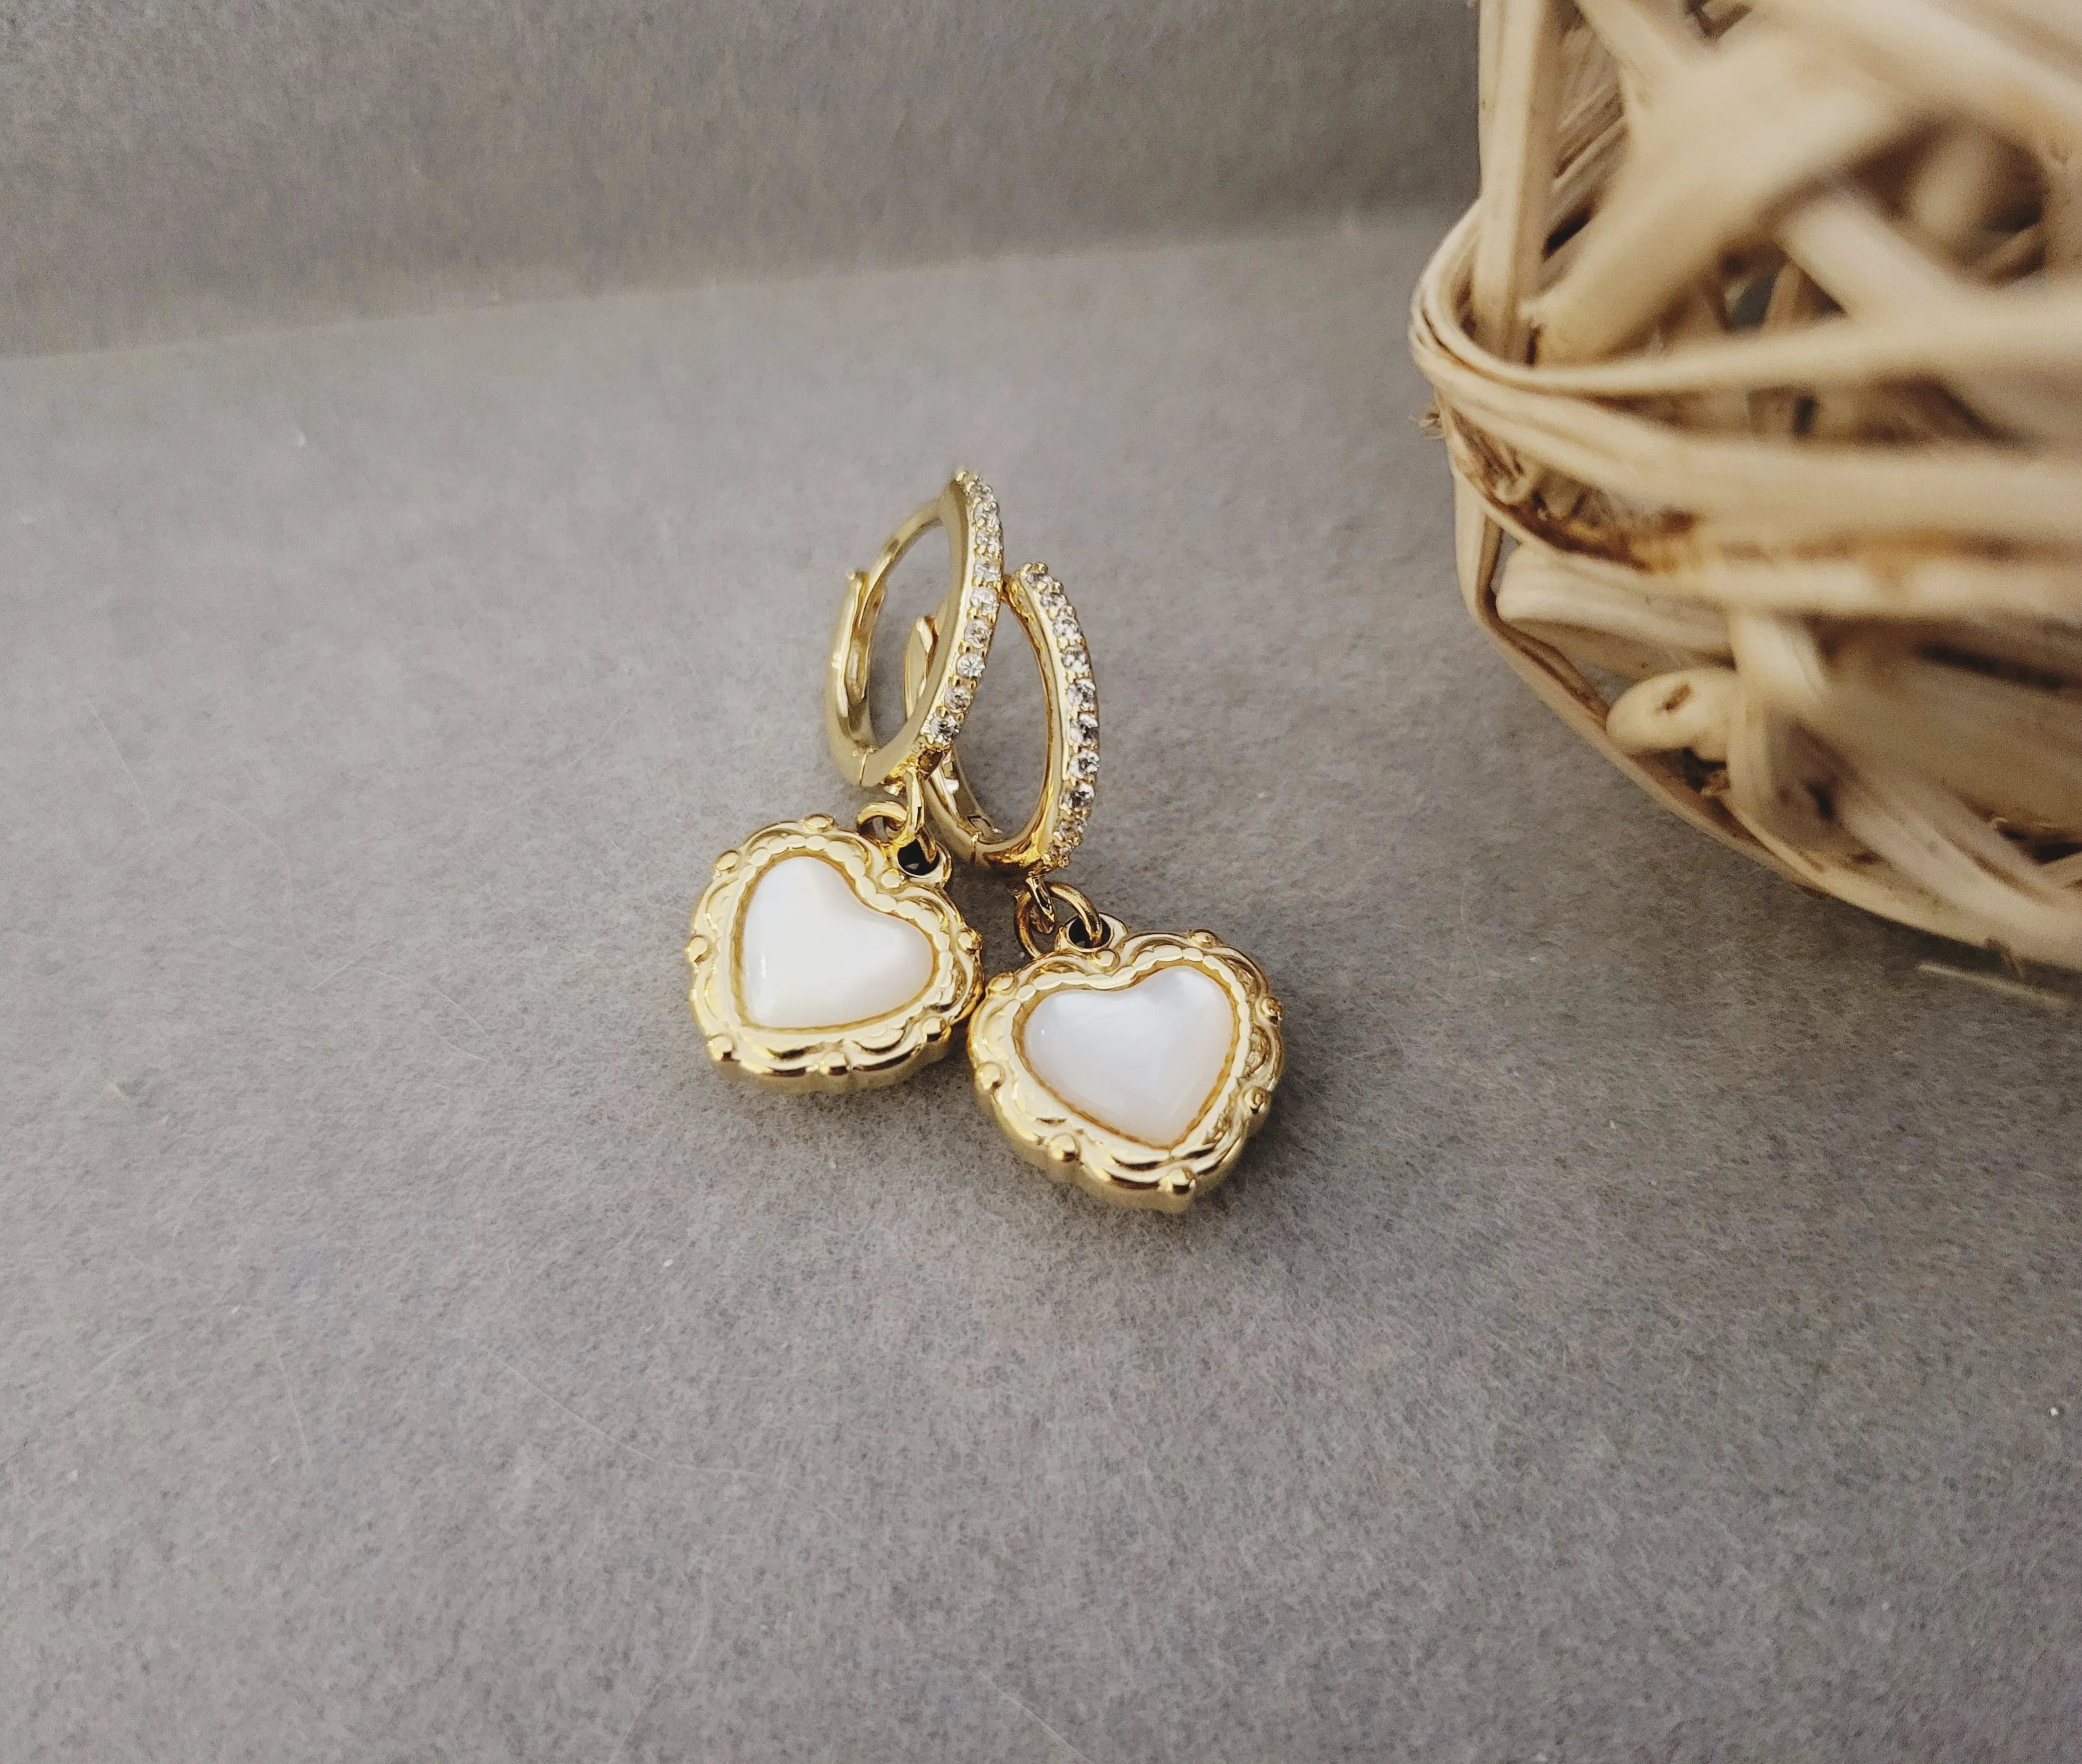 Gold Vintage Mother Of Pearl Earrings product images.